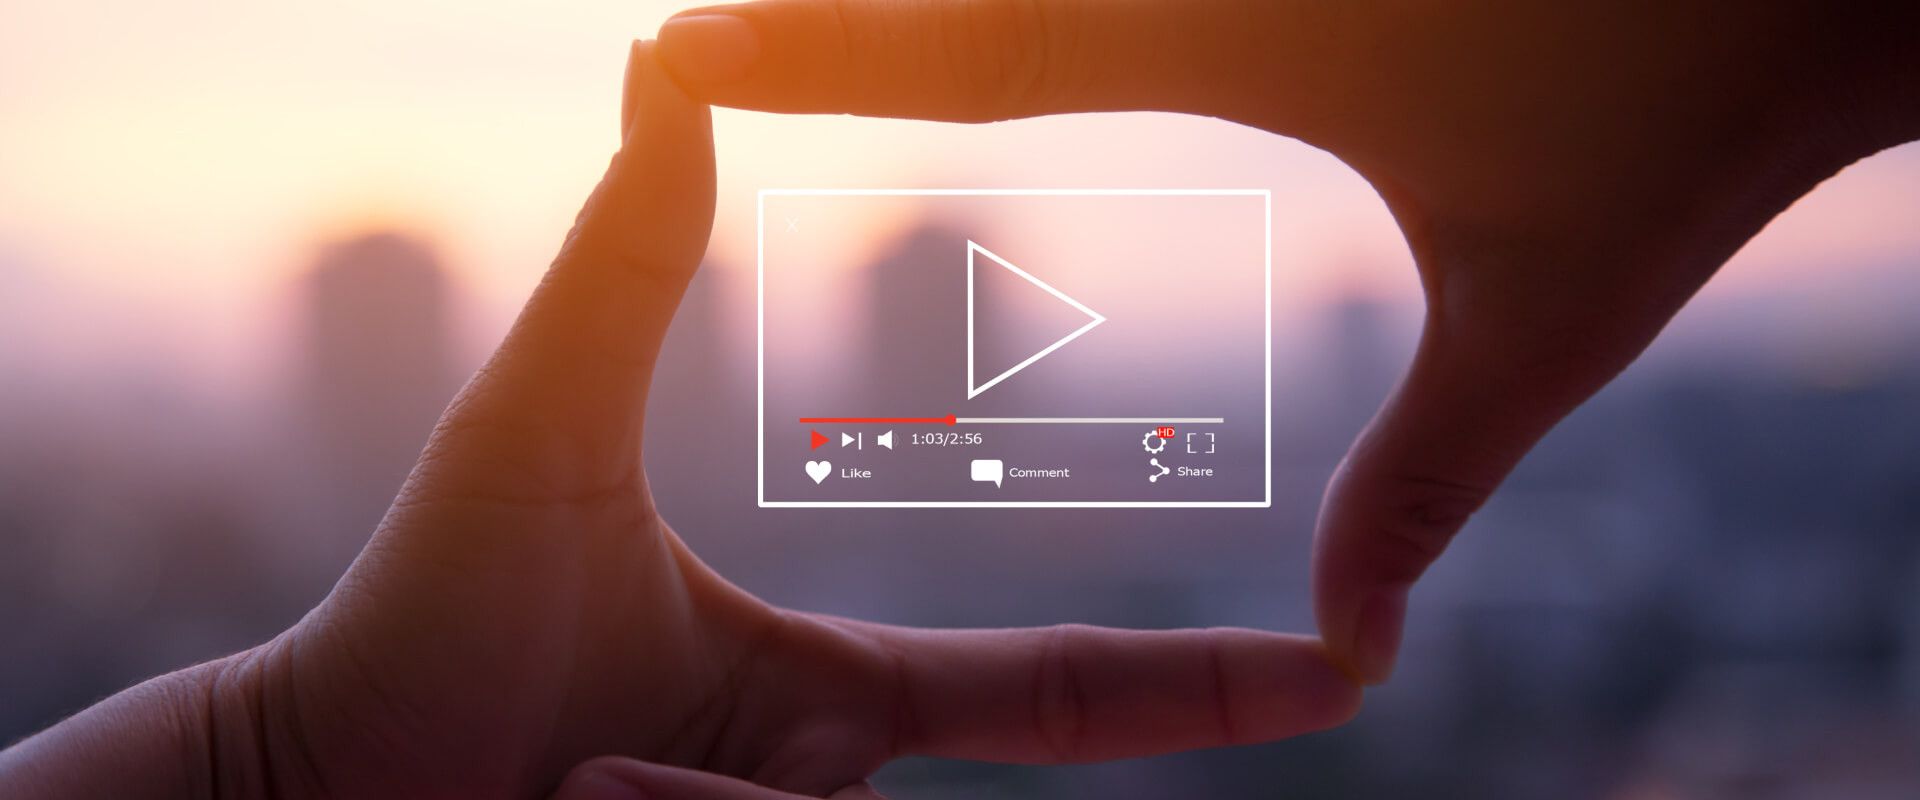 Digital Videos are the Best Fit for Upcoming Marketing Trends